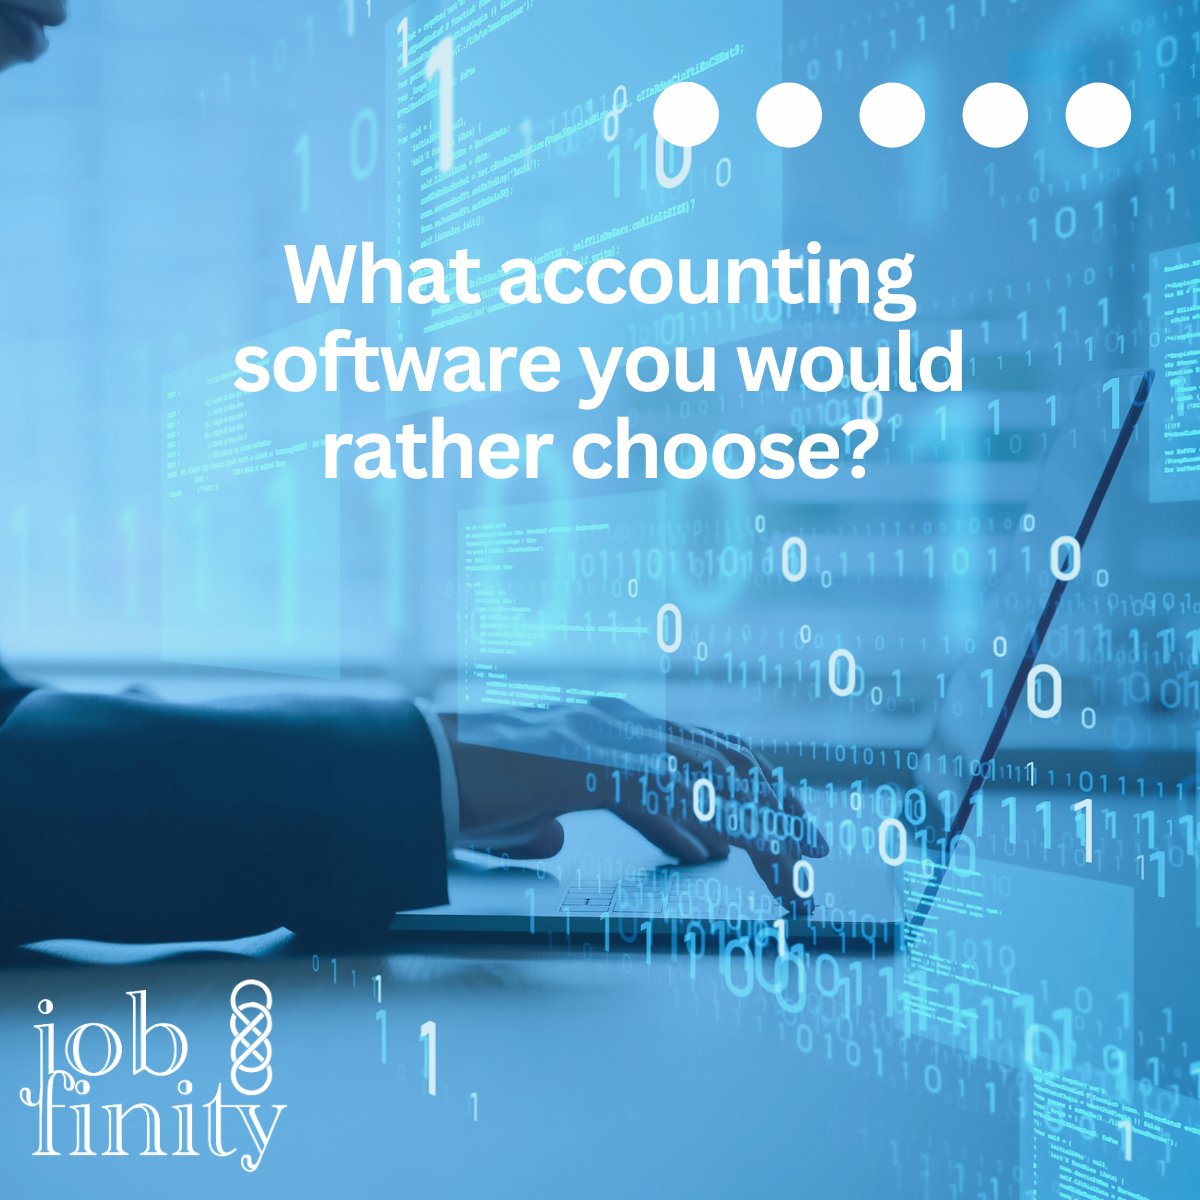 🔍 Looking for the perfect accounting software tailored to your business? Let Jobfinity be your guide to finding the ideal solution that meets all your financial management needs. Discover how we can streamline your accounting process today! 

#Jobfinity #AccountingSolutions